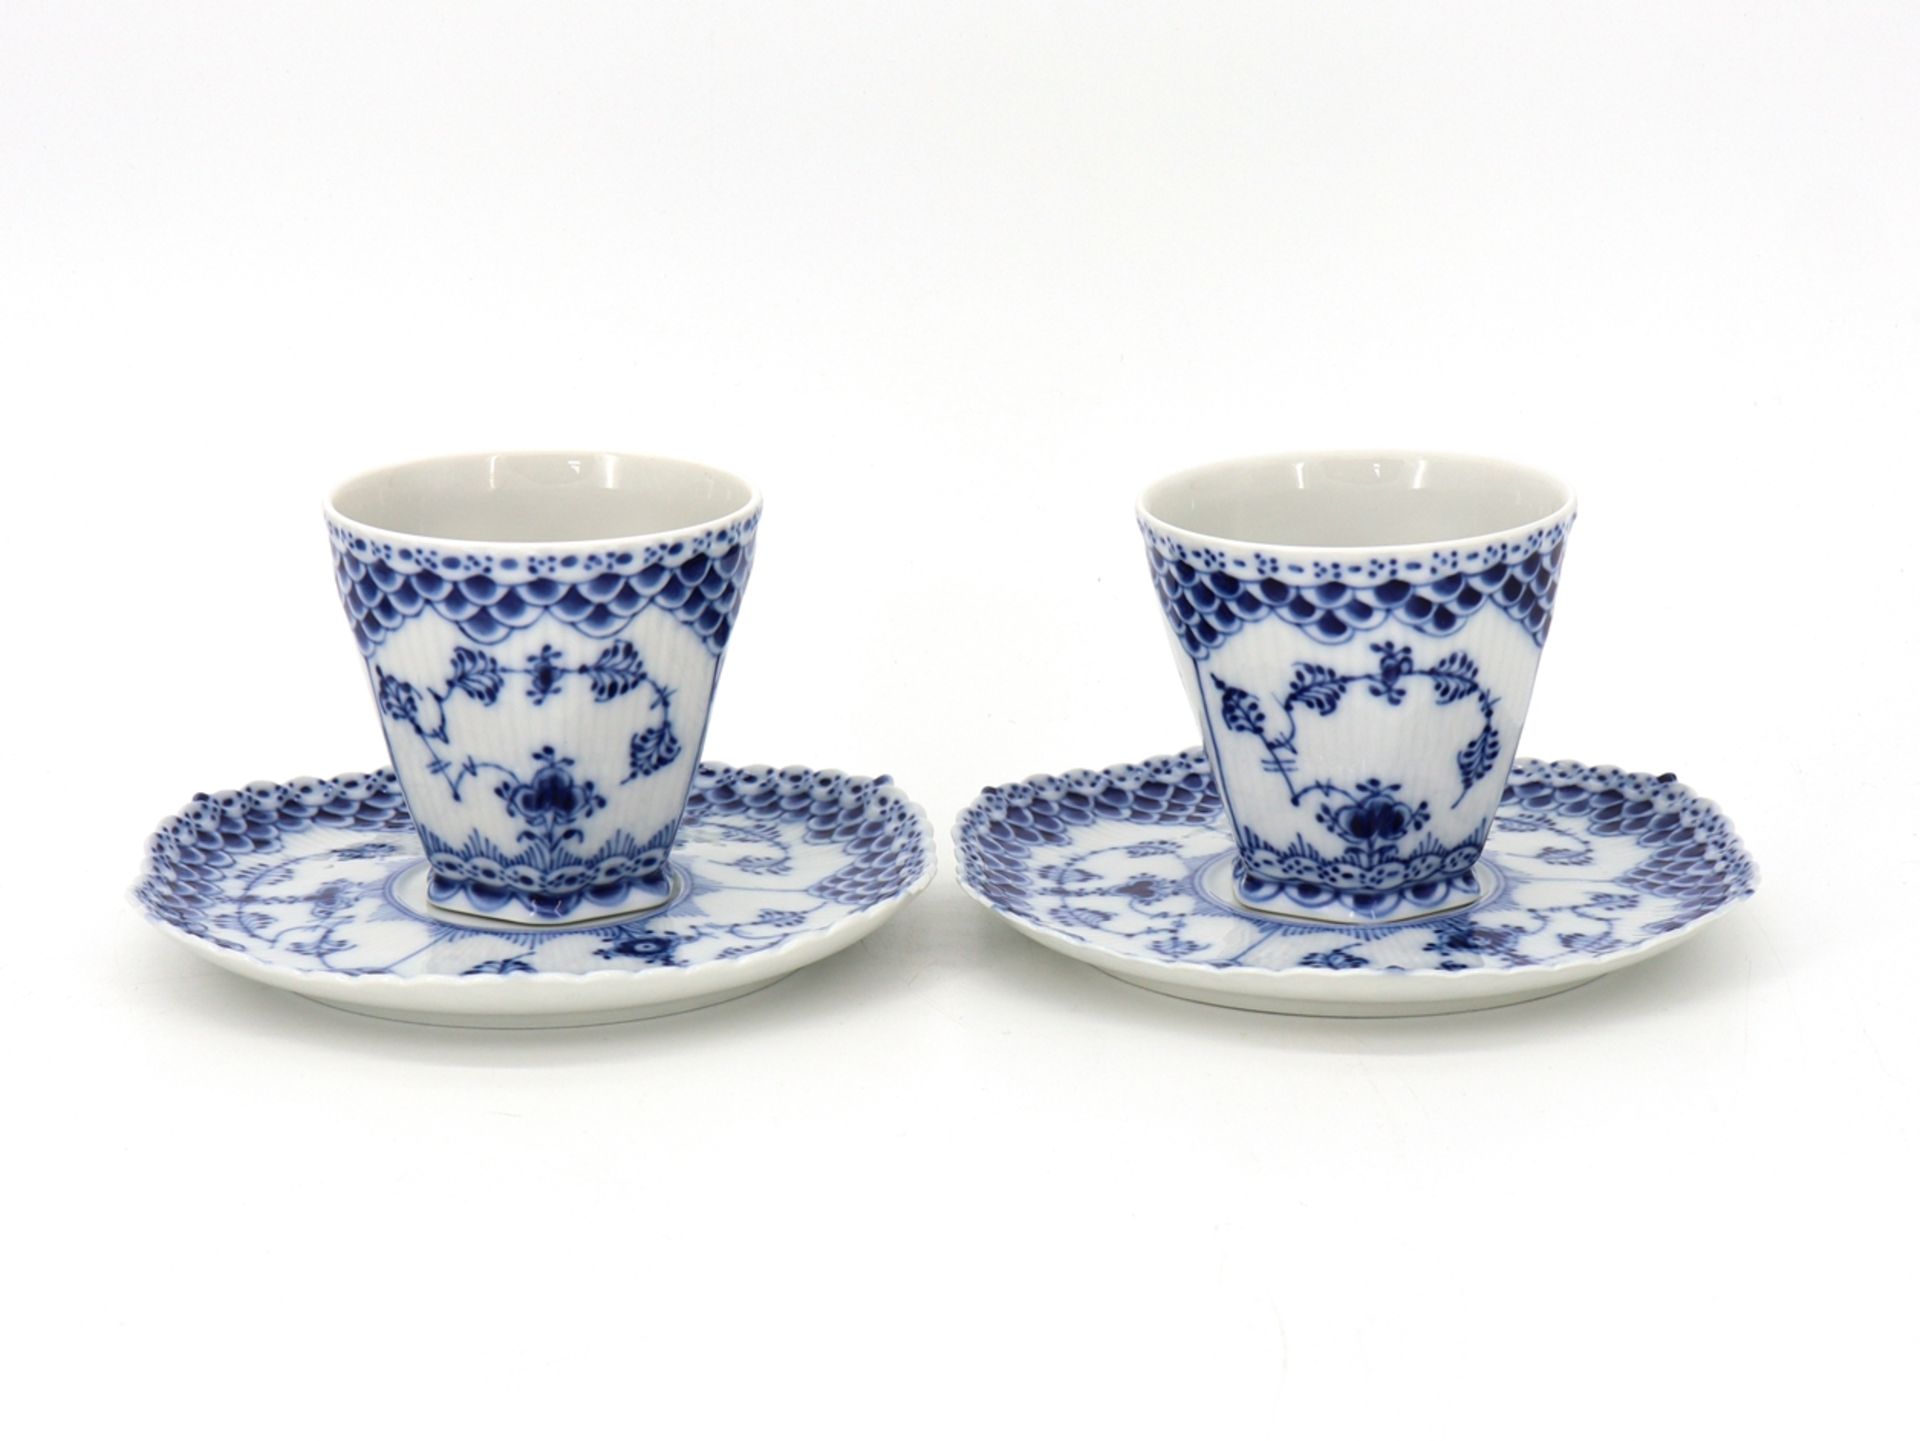 2 Royal Copenhagen Musselmalet Full Point Coffee Cups, No.: 1036 - Image 3 of 6